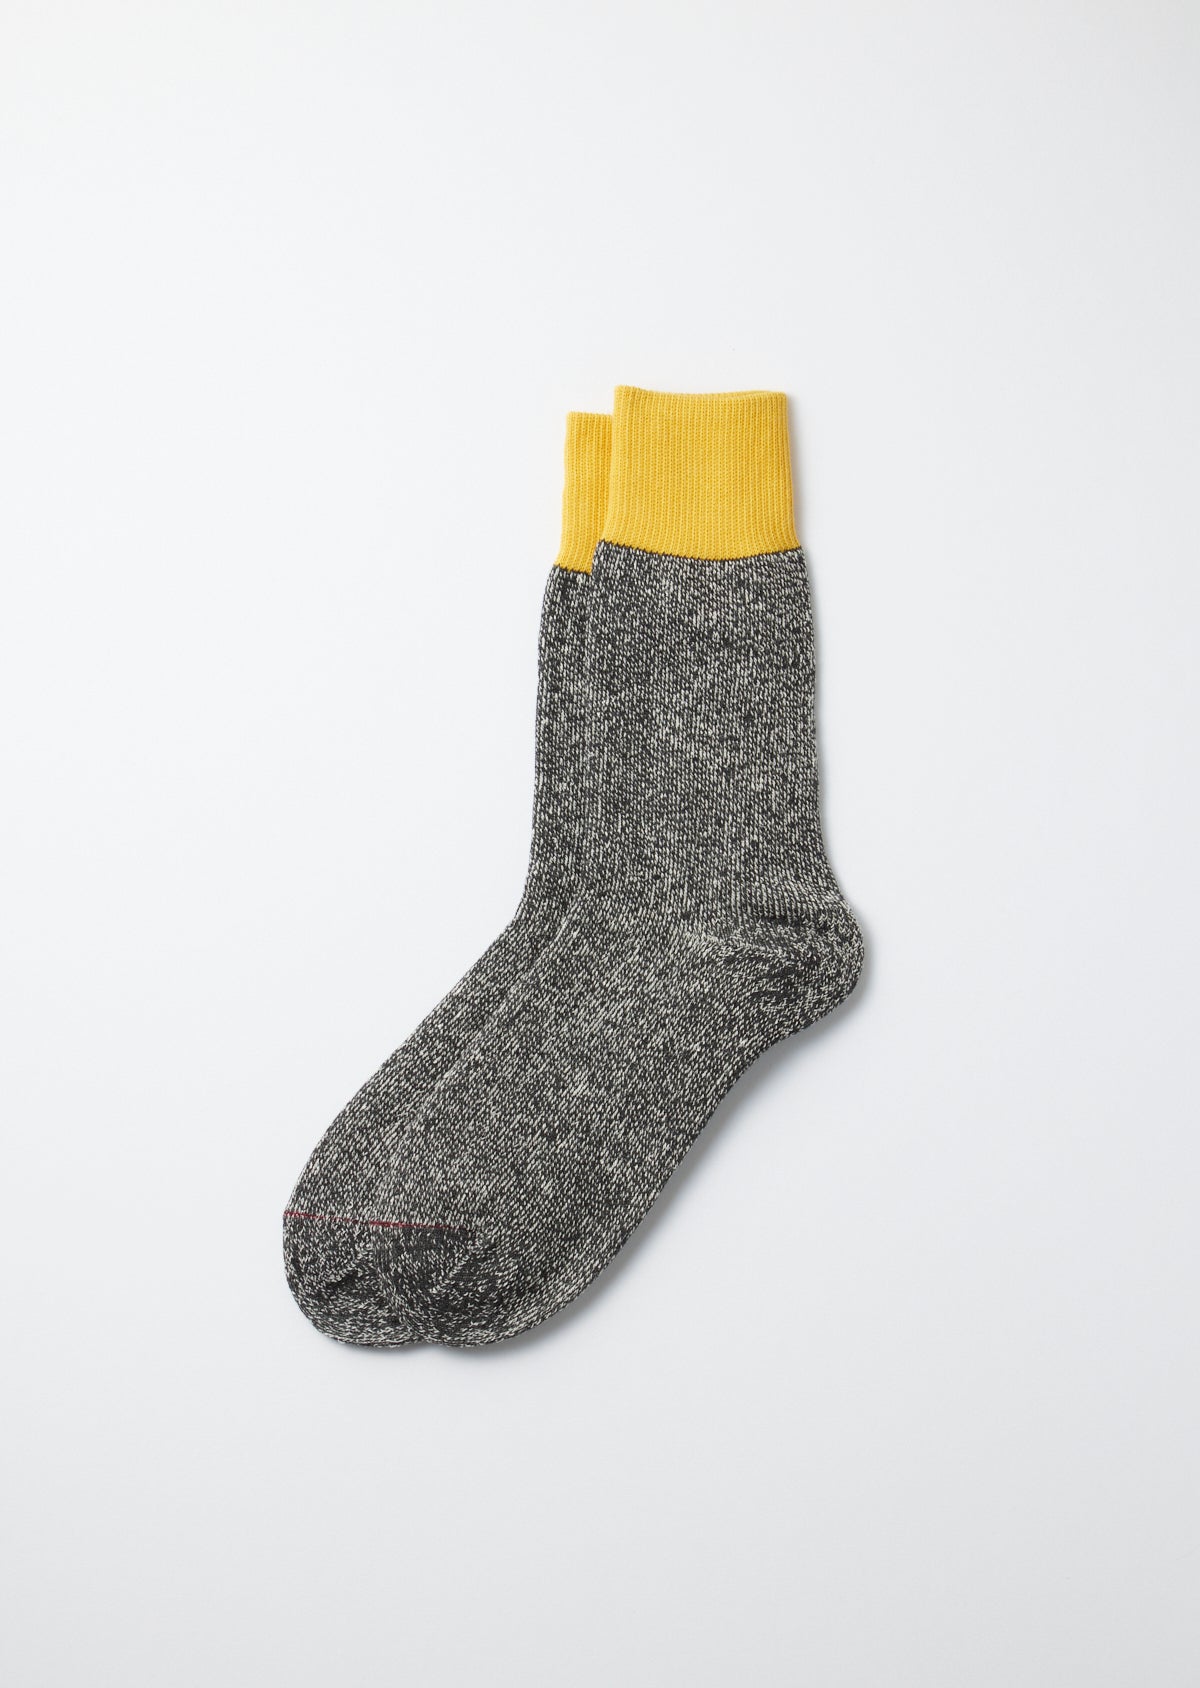 Rototo Double Face Socks "Silk & Cotton" (Yellow/Charcoal)